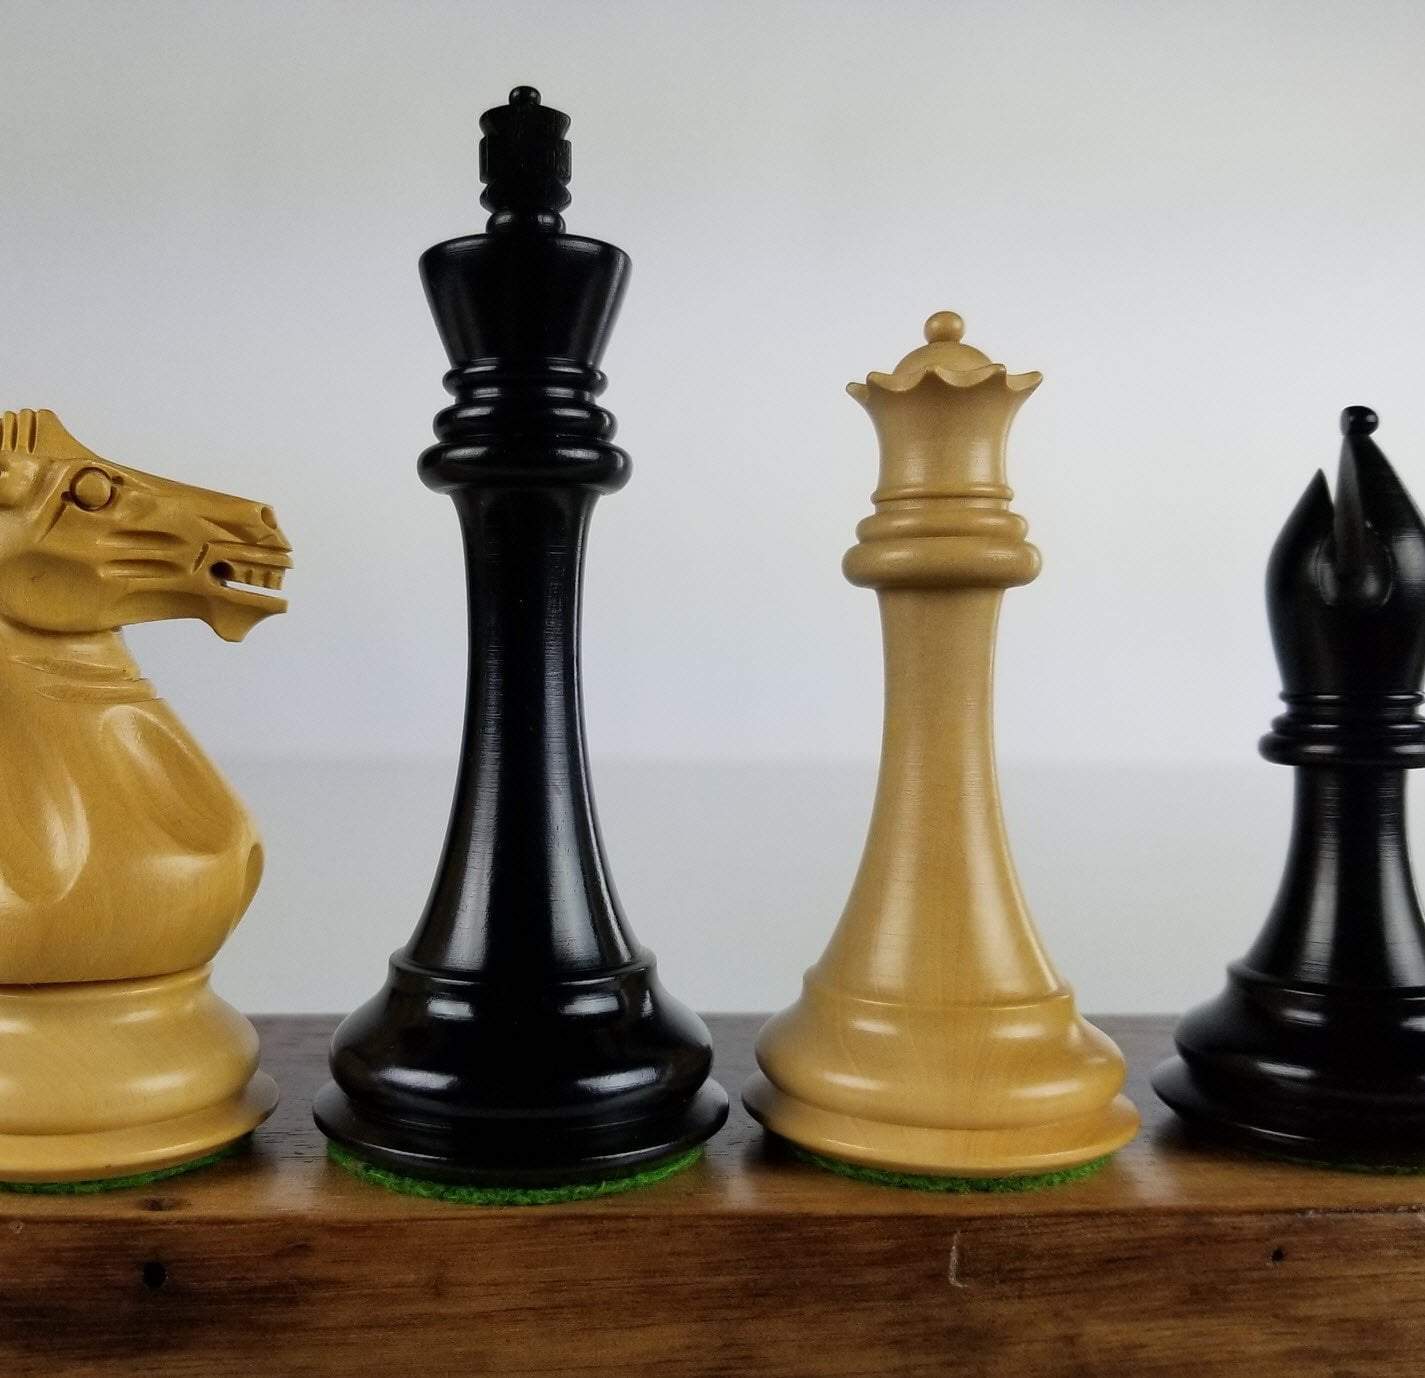 SINGLE REPLACEMENT PIECES: 4" Championship Design Chess Pieces in Ebony - Parts - Chess-House